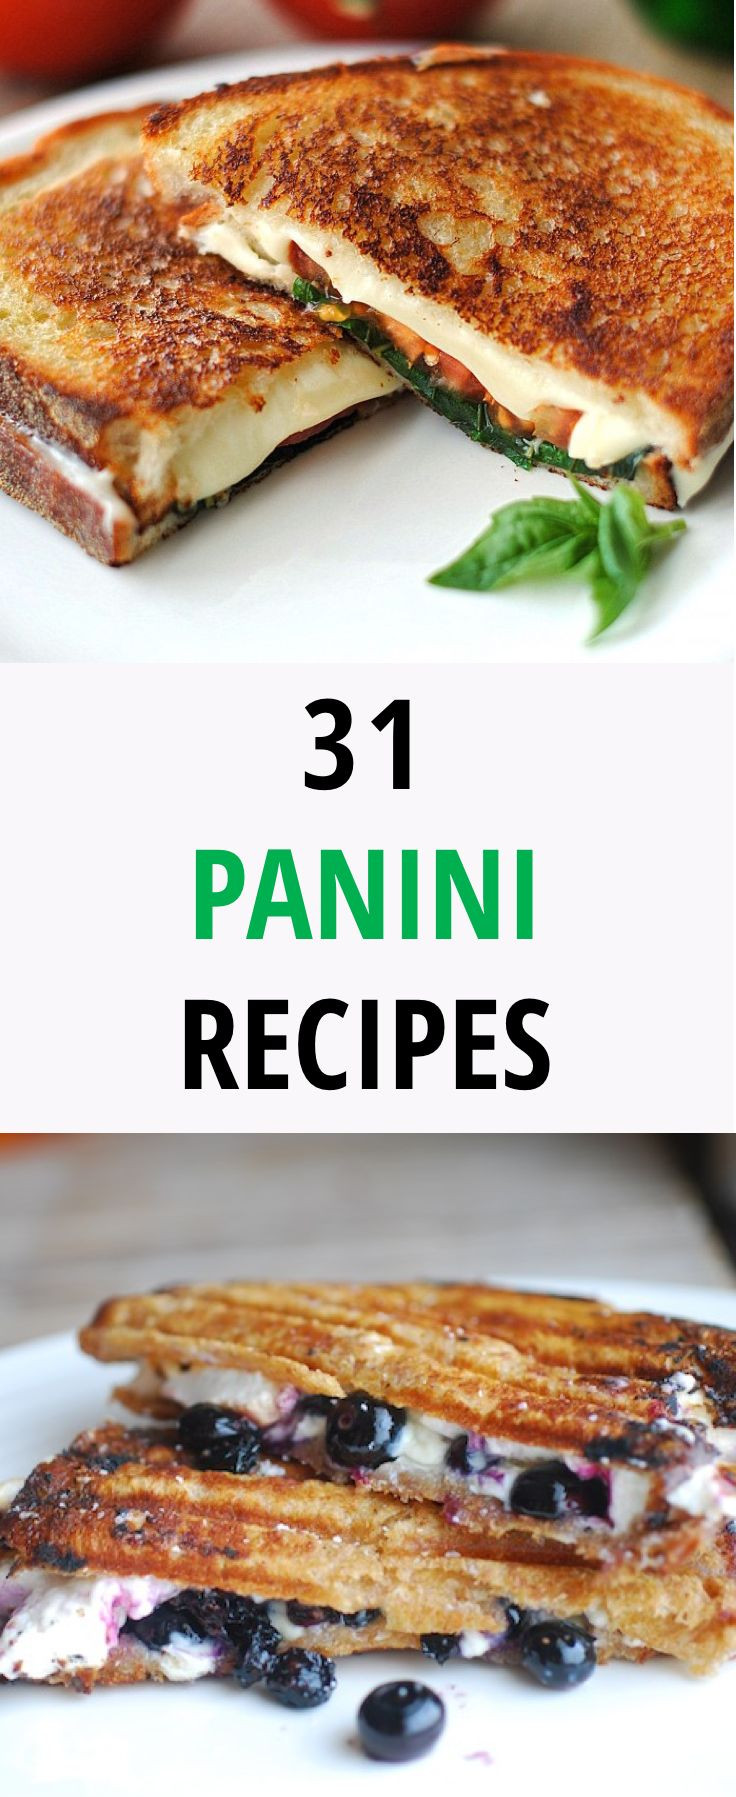 Healthy Panini Recipes
 25 great ideas about Panini sandwiches on Pinterest